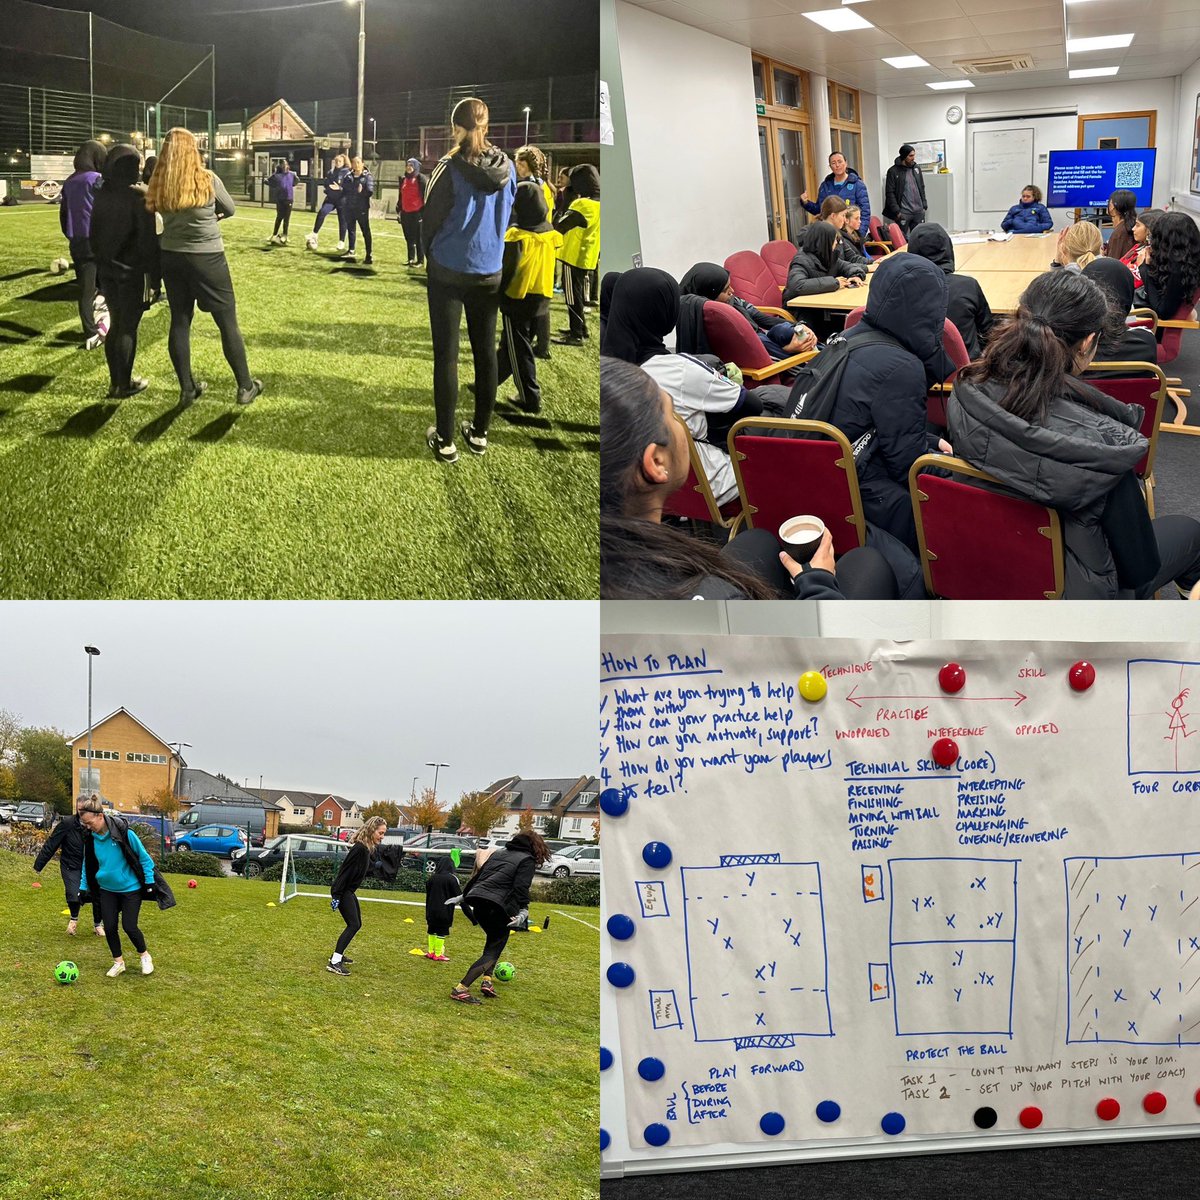 A great week as FA Community Champion, started off at @frenfordmsawfc with 25 females attending and taking their first steps into coaching.Ended the week at Little Canfield Stars, supporting new coaches with practice ideas. Great work at the clubs in diversifying the workforce 👏🏼